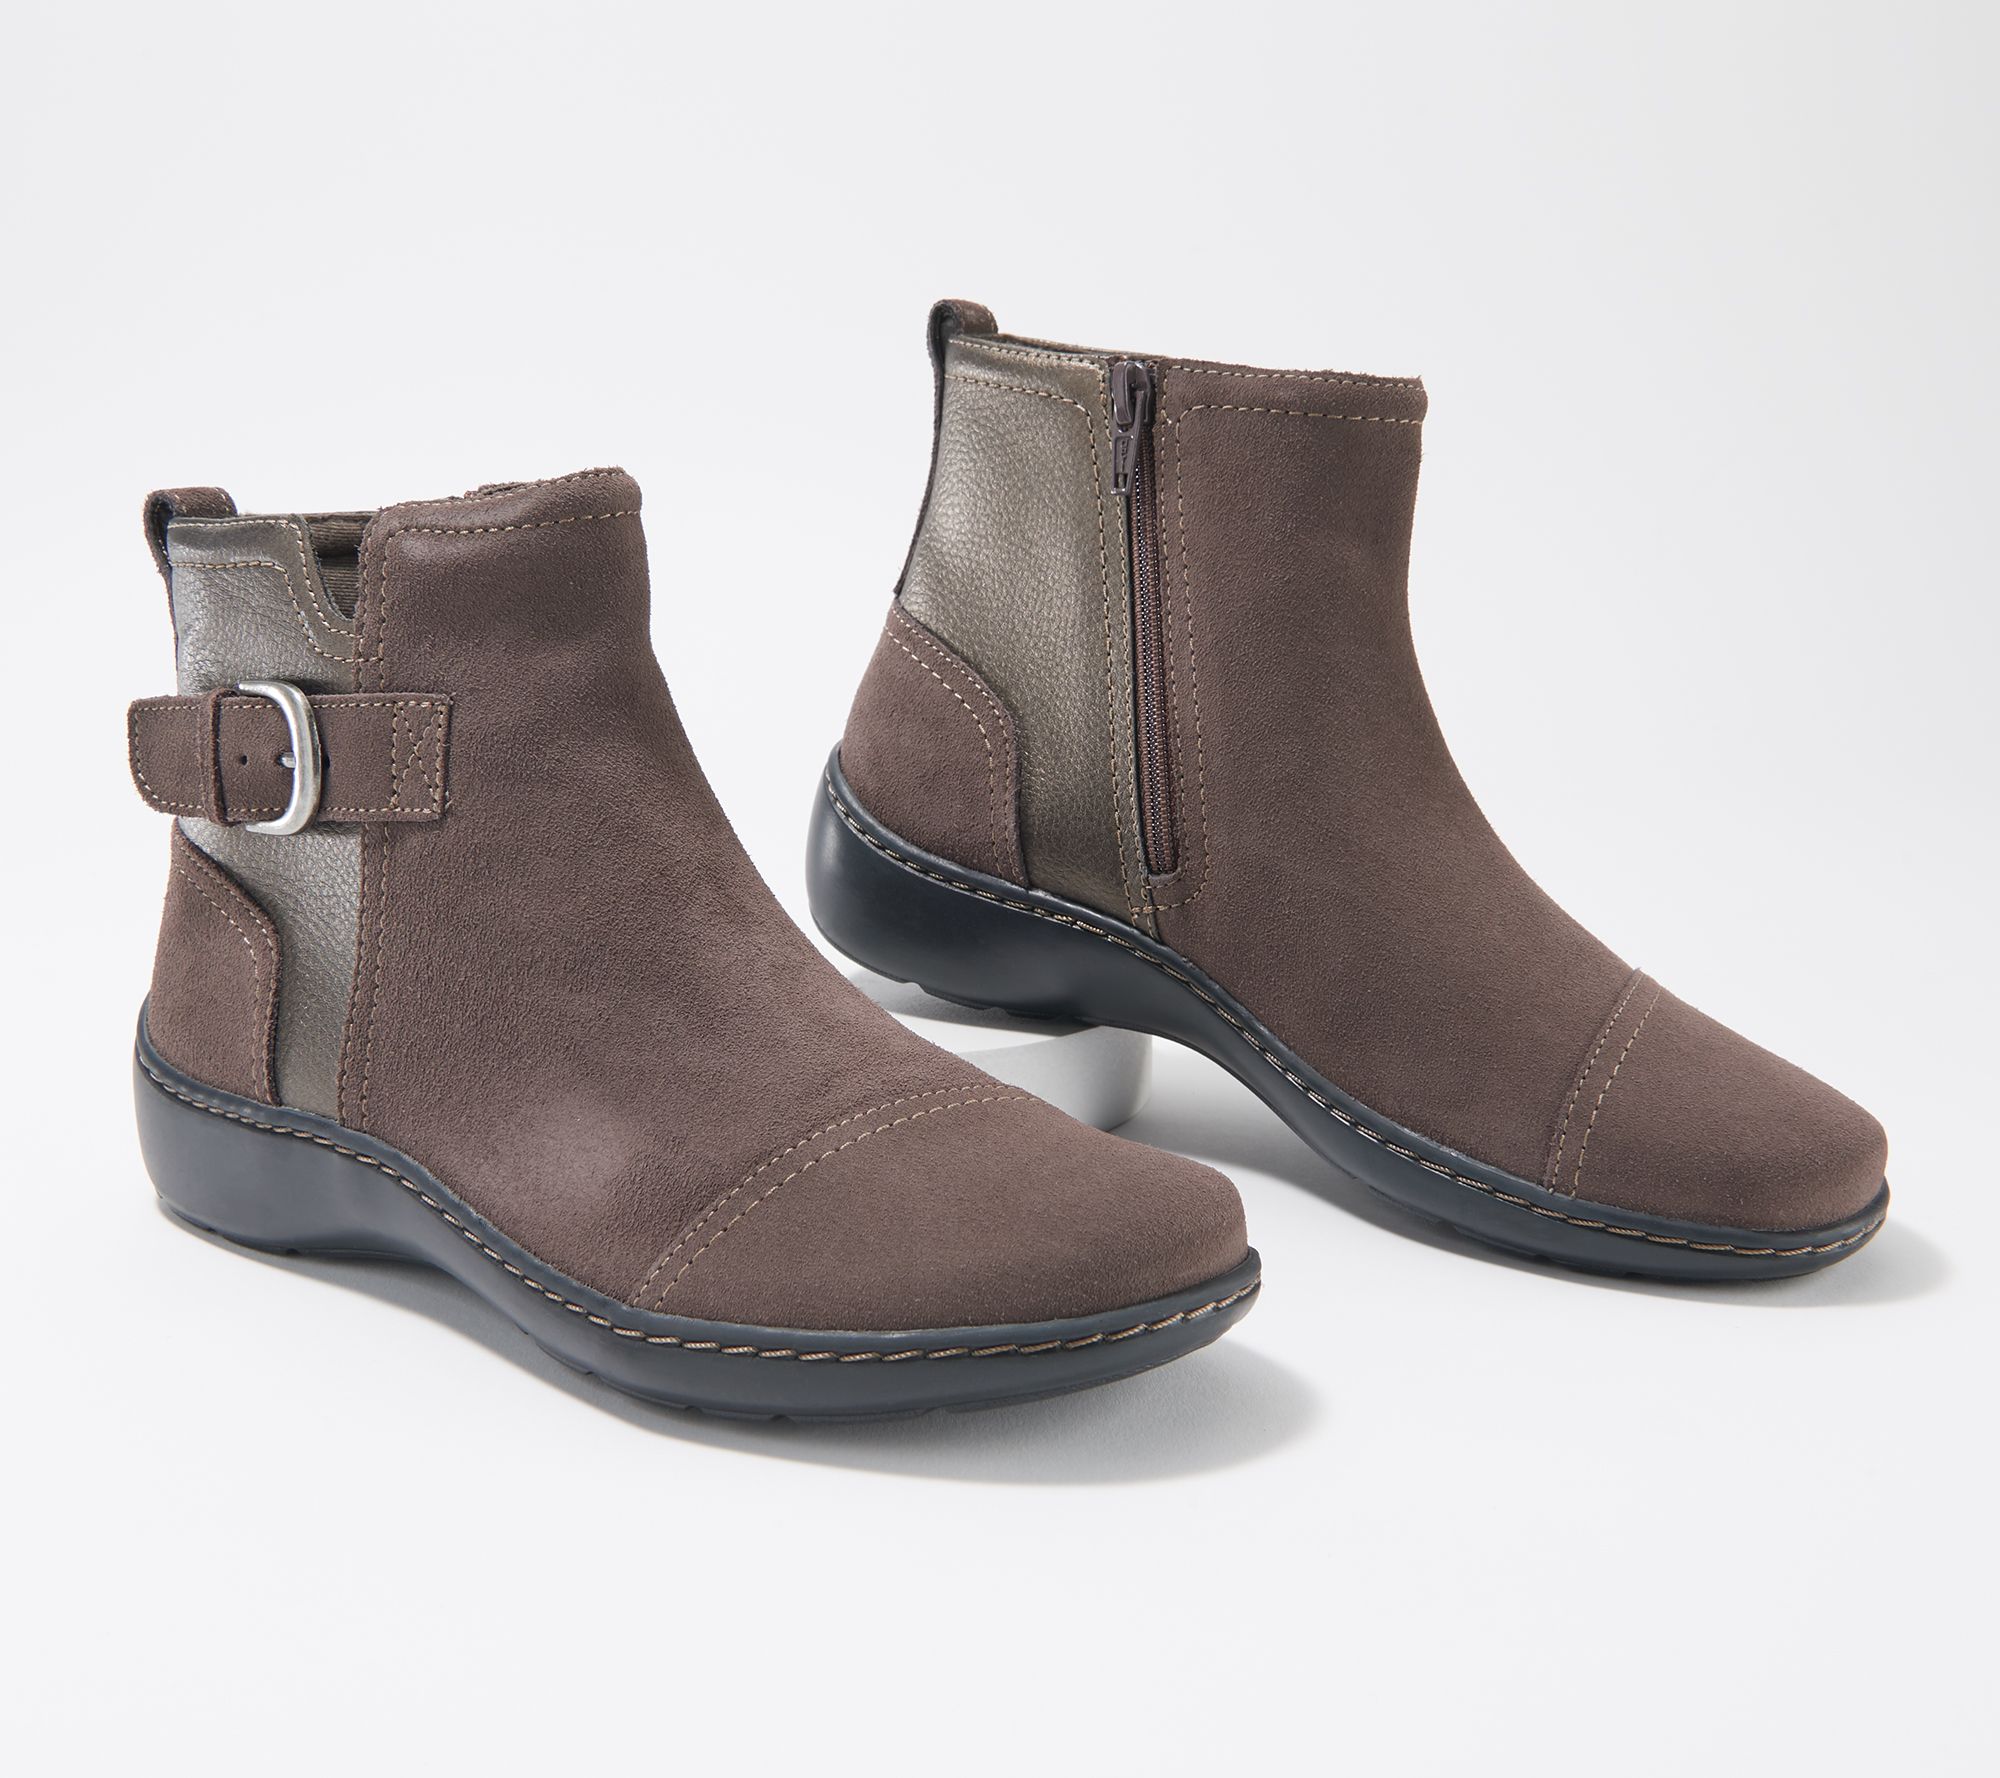 clarks collection boots